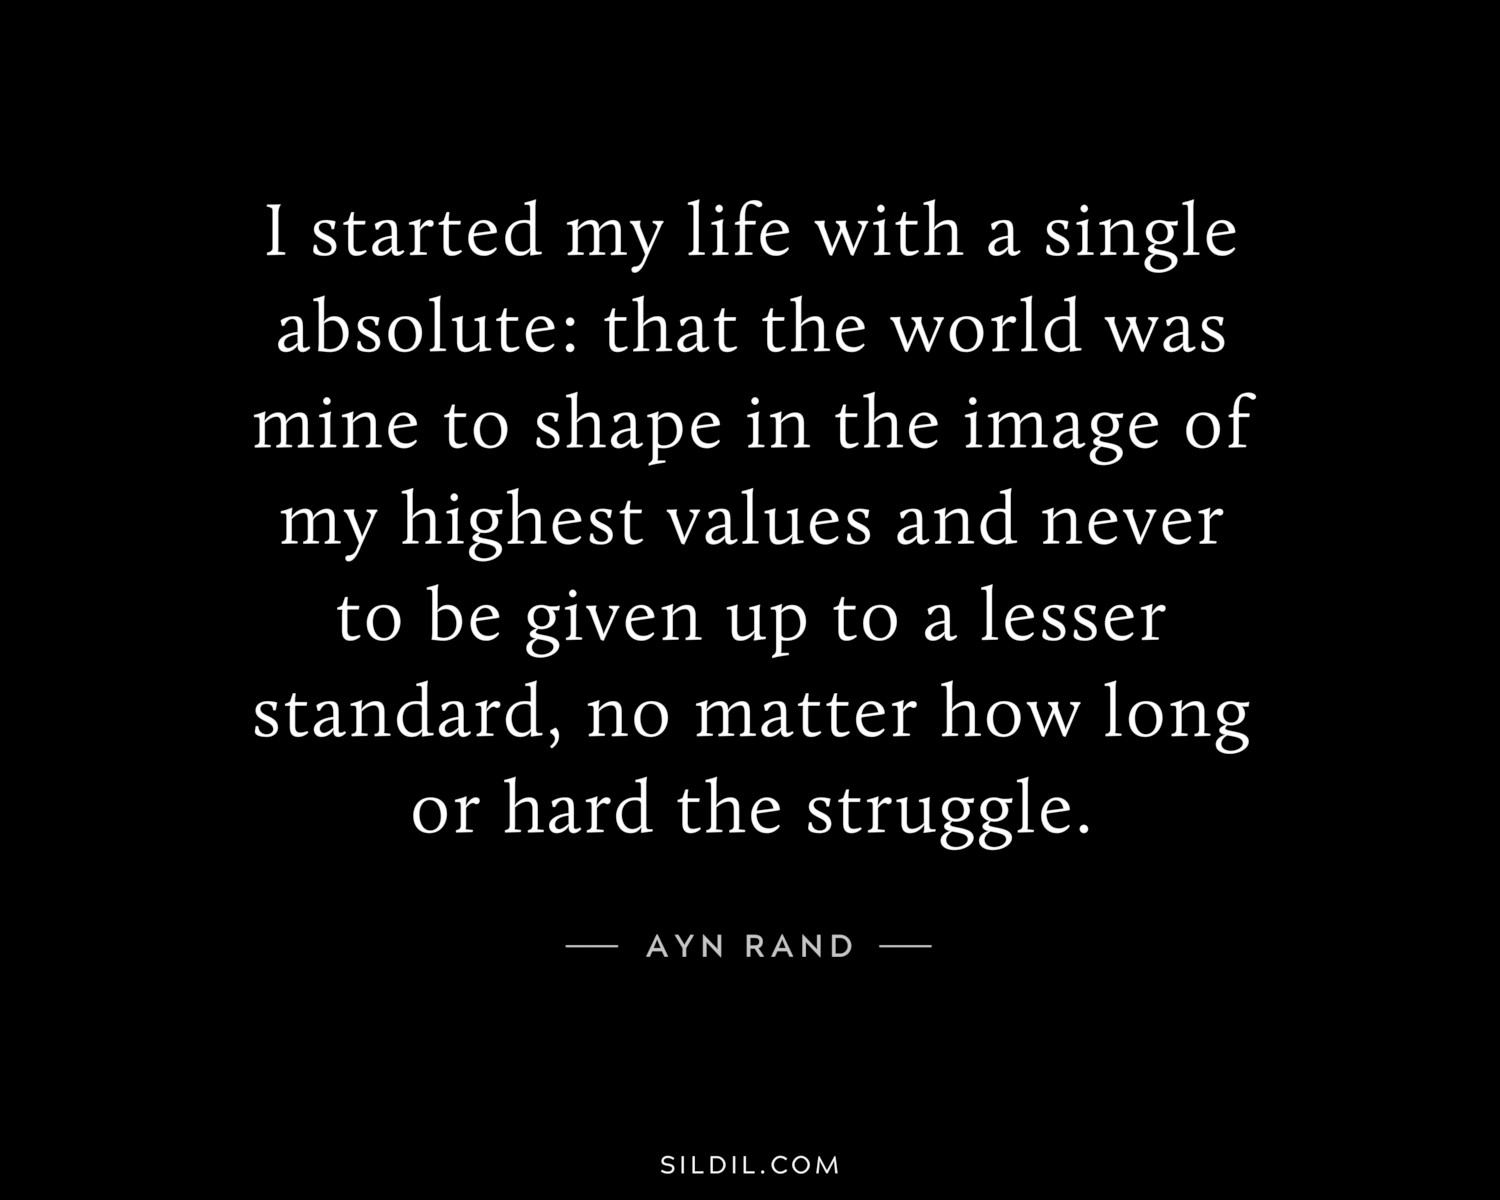 I started my life with a single absolute: that the world was mine to shape in the image of my highest values and never to be given up to a lesser standard, no matter how long or hard the struggle.